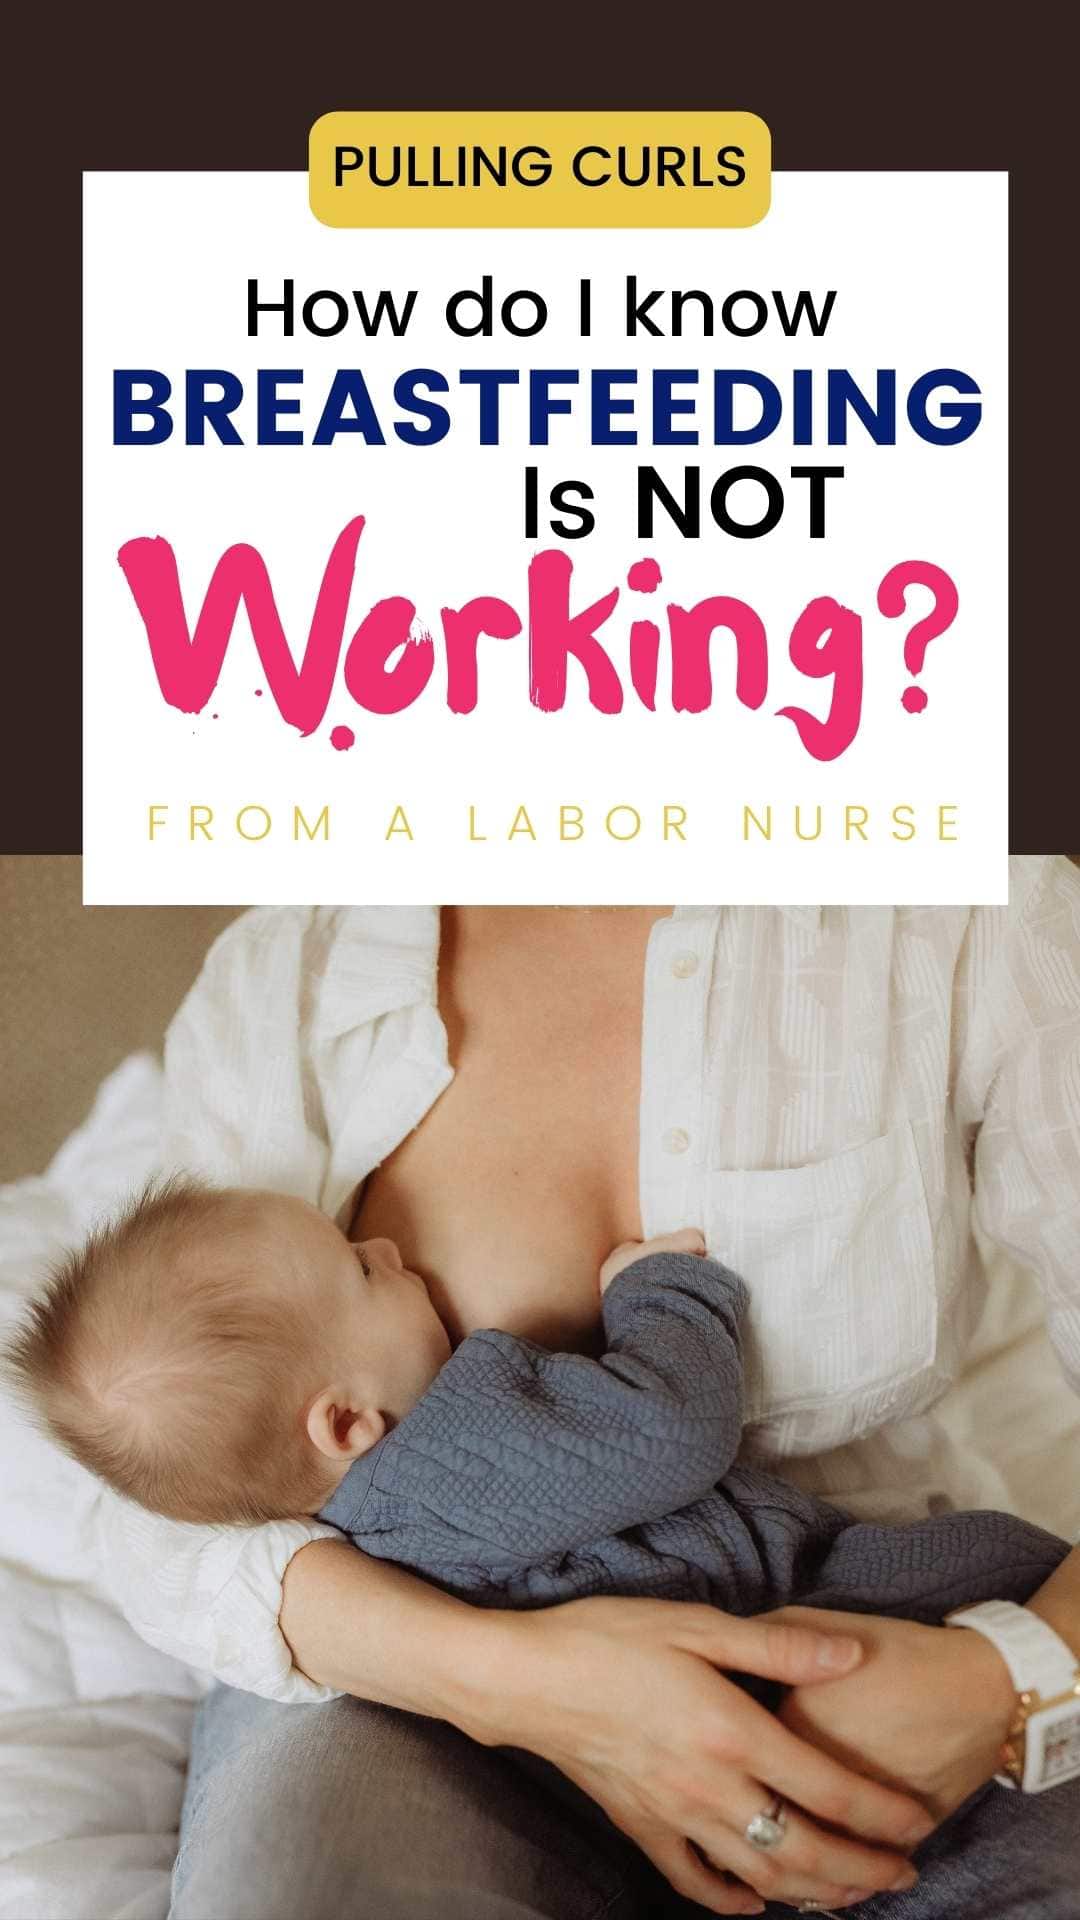 One of the most important things to know is the signs that breastfeeding isn't working. More and more women are finding that biologically breastfeeding is NOT working -- and they are not actually feeding their baby (often accompanied by guilt). This post teaches the signs that breastfeeding isn't working (when you aren't getting enough milk) and share's this RN's tale of when breastfeeding didn't work for me. via @pullingcurls